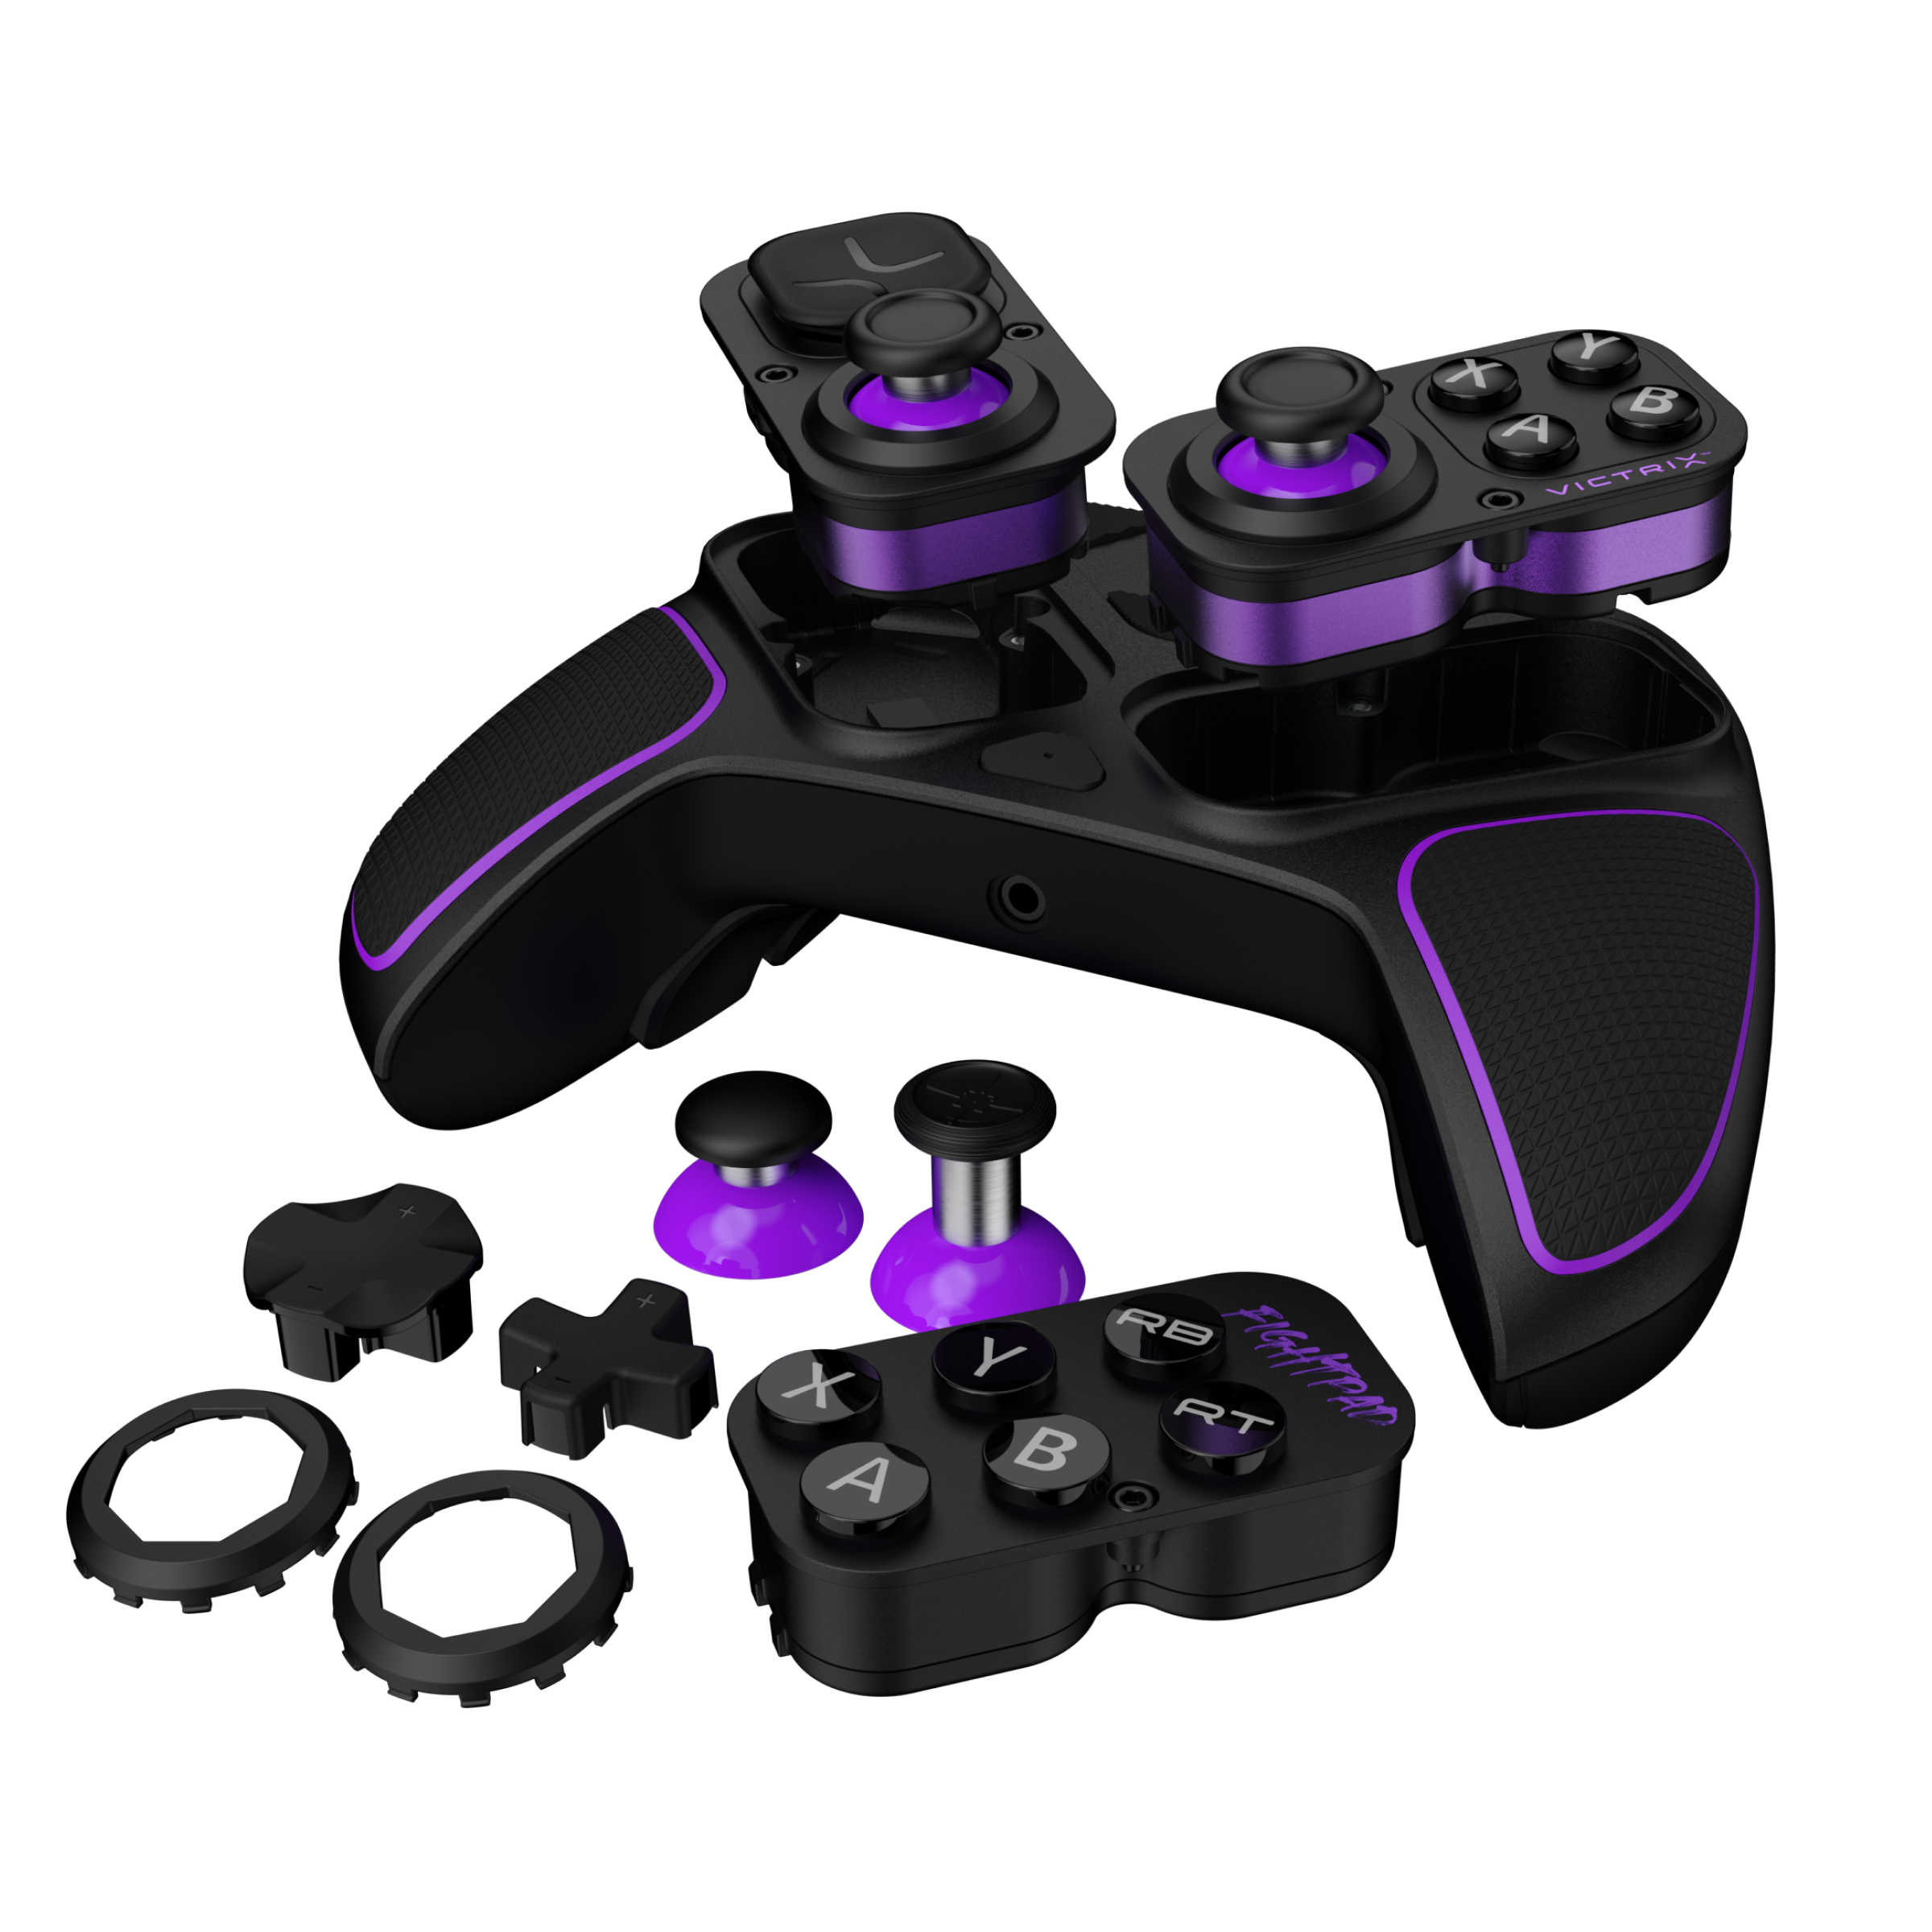 Award-Winning Victrix Pro BFG™ Wireless Controller Now Available